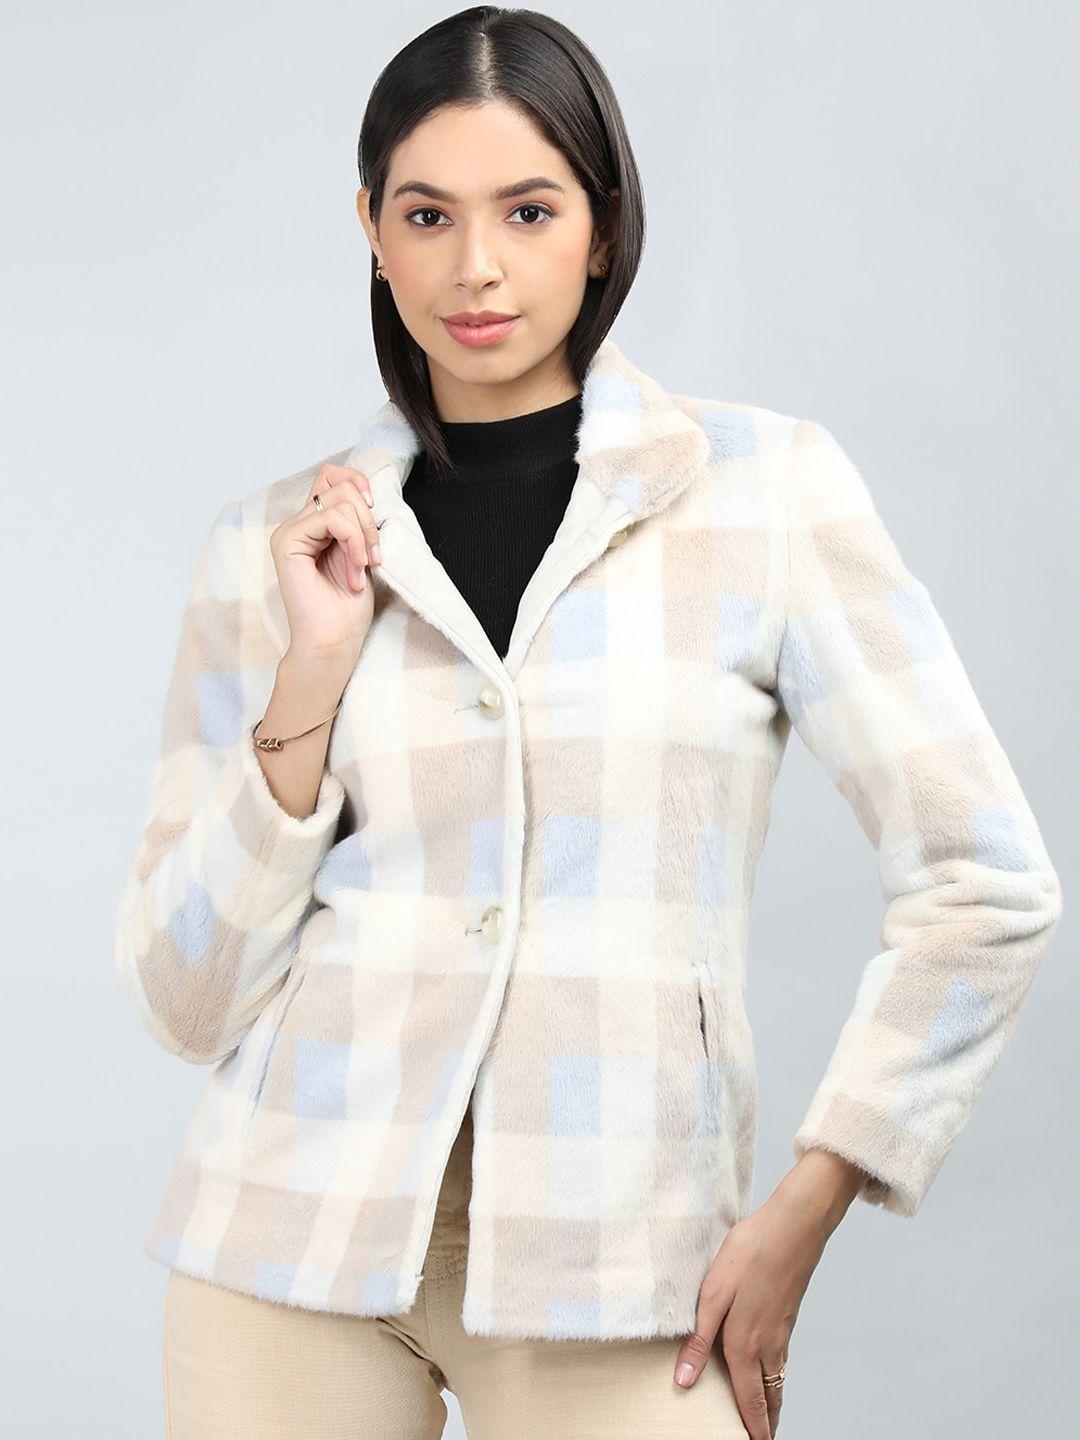 lure urban checked spread collar single-breasted woollen overcoat